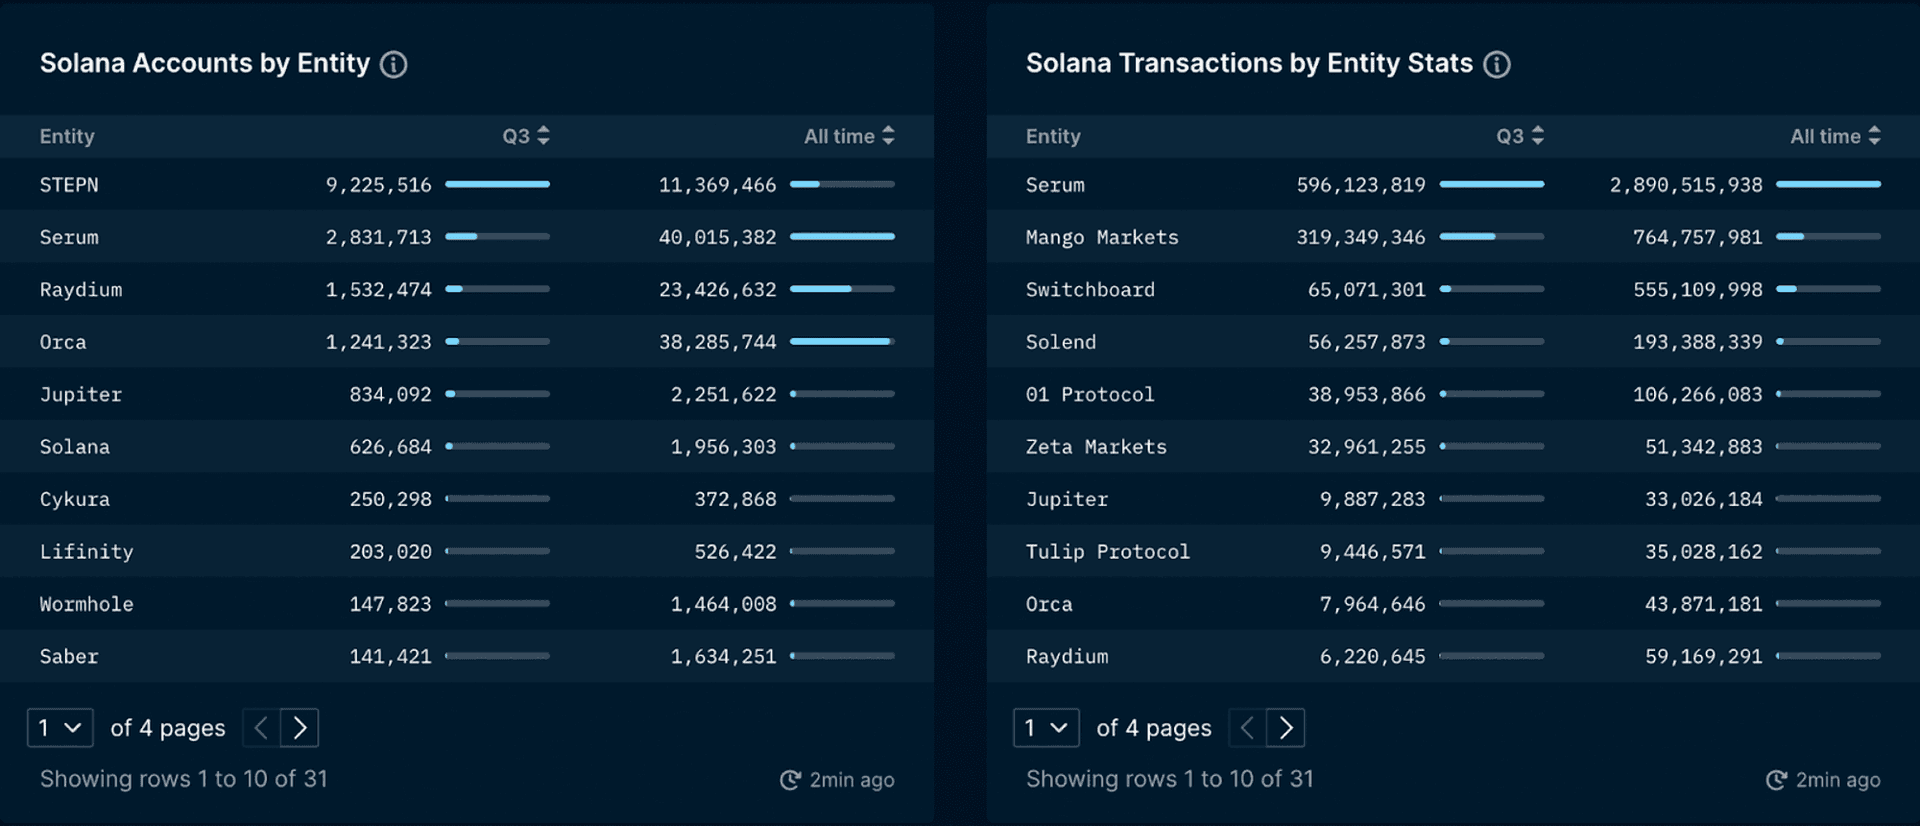 Top Entities on Solana Based on Users and Transactions